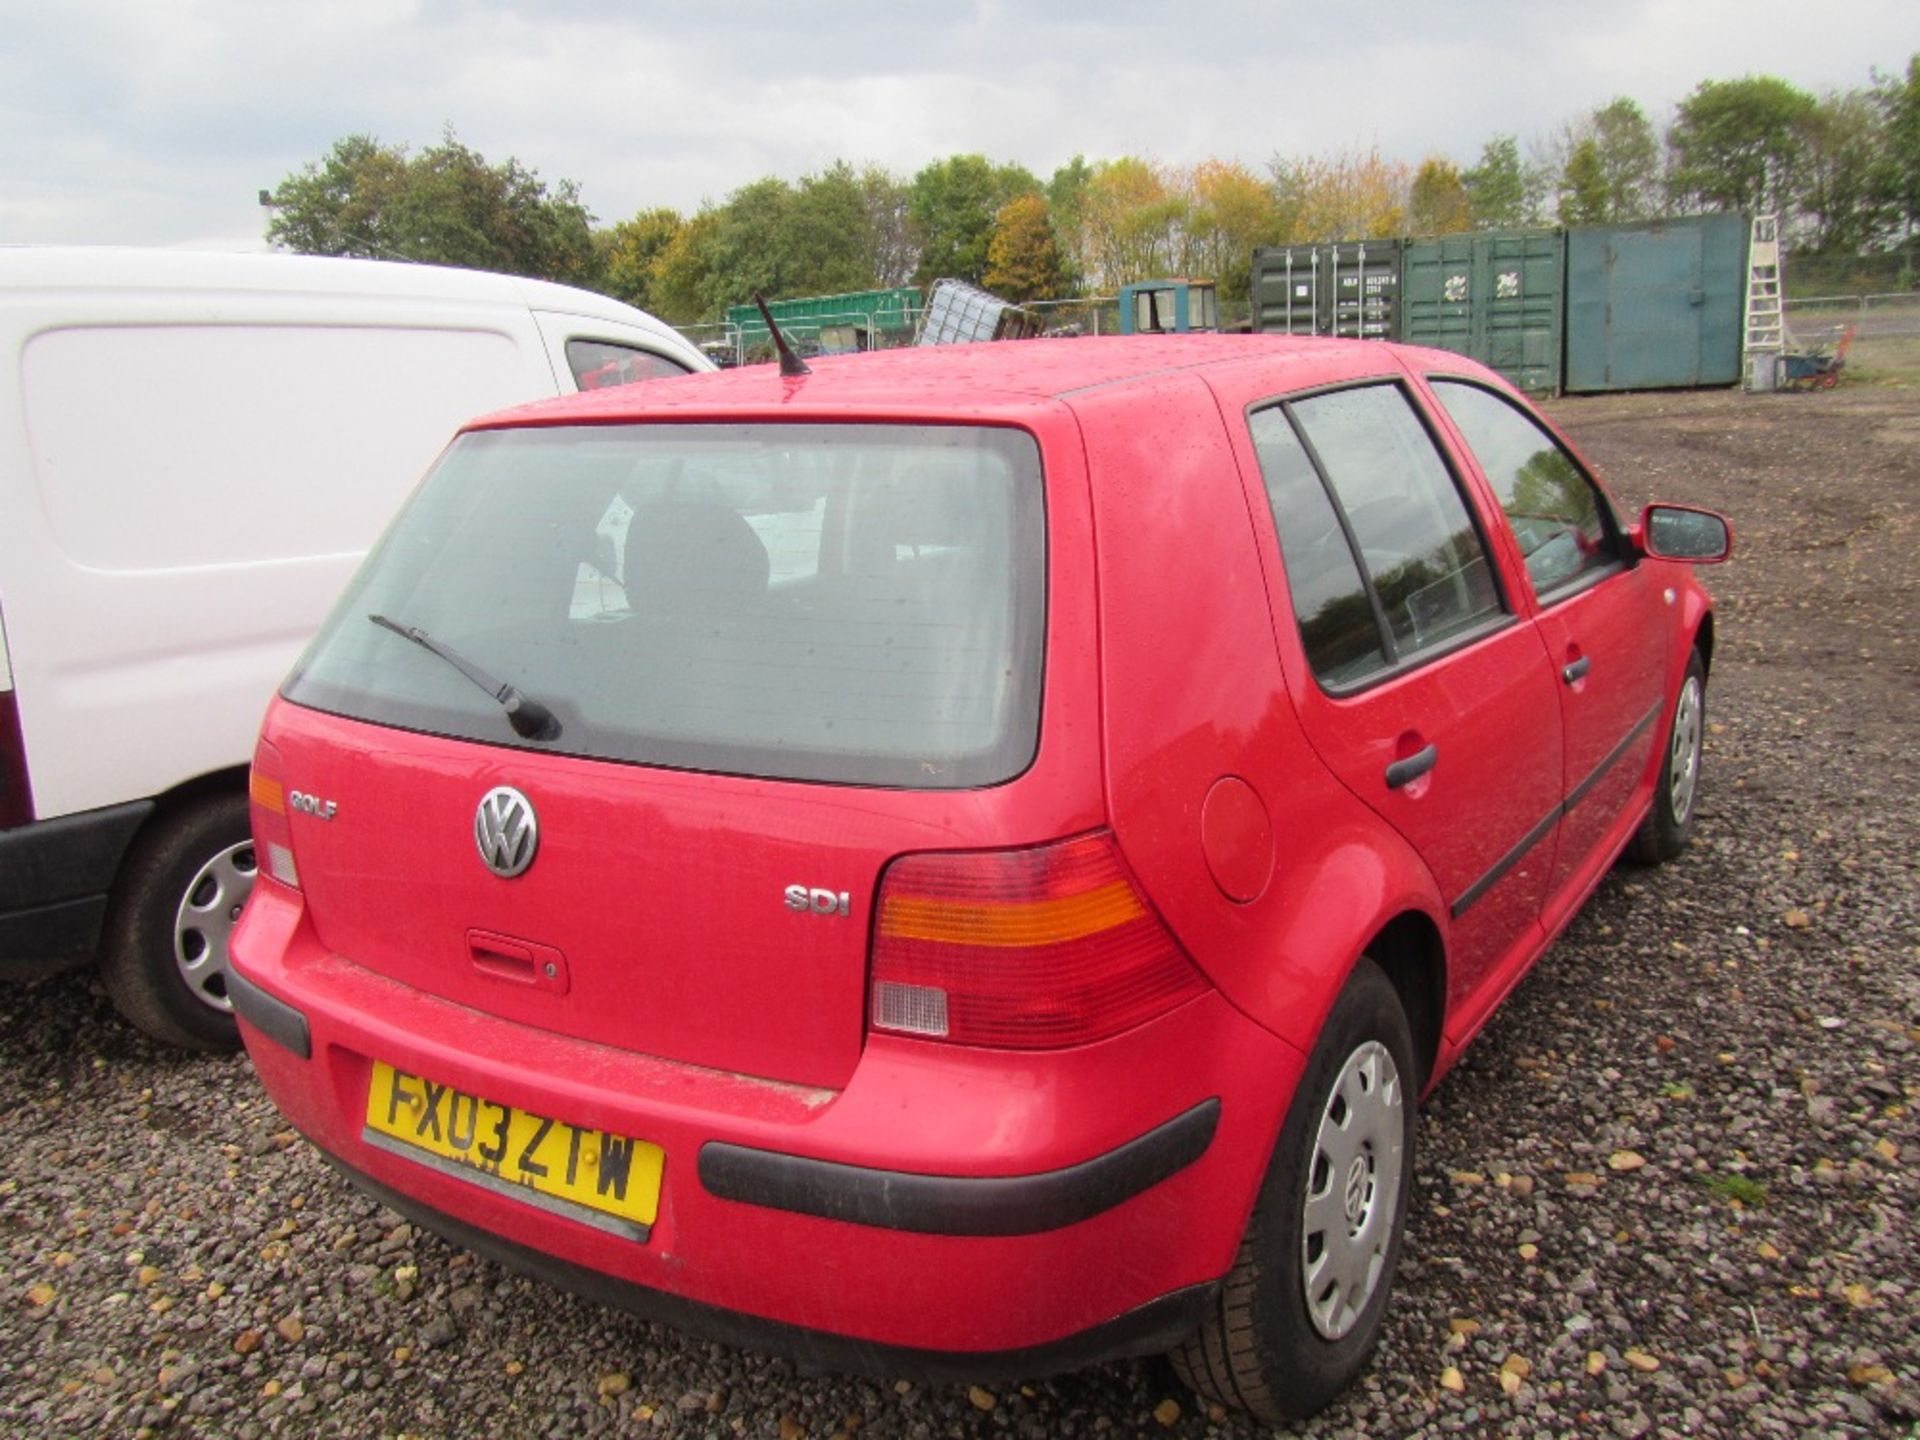 VW Golf E SDI 1.9 5 Door with Part Service History. Reg Docs will be supplied. Mileage: 137,658. MOT - Image 3 of 4